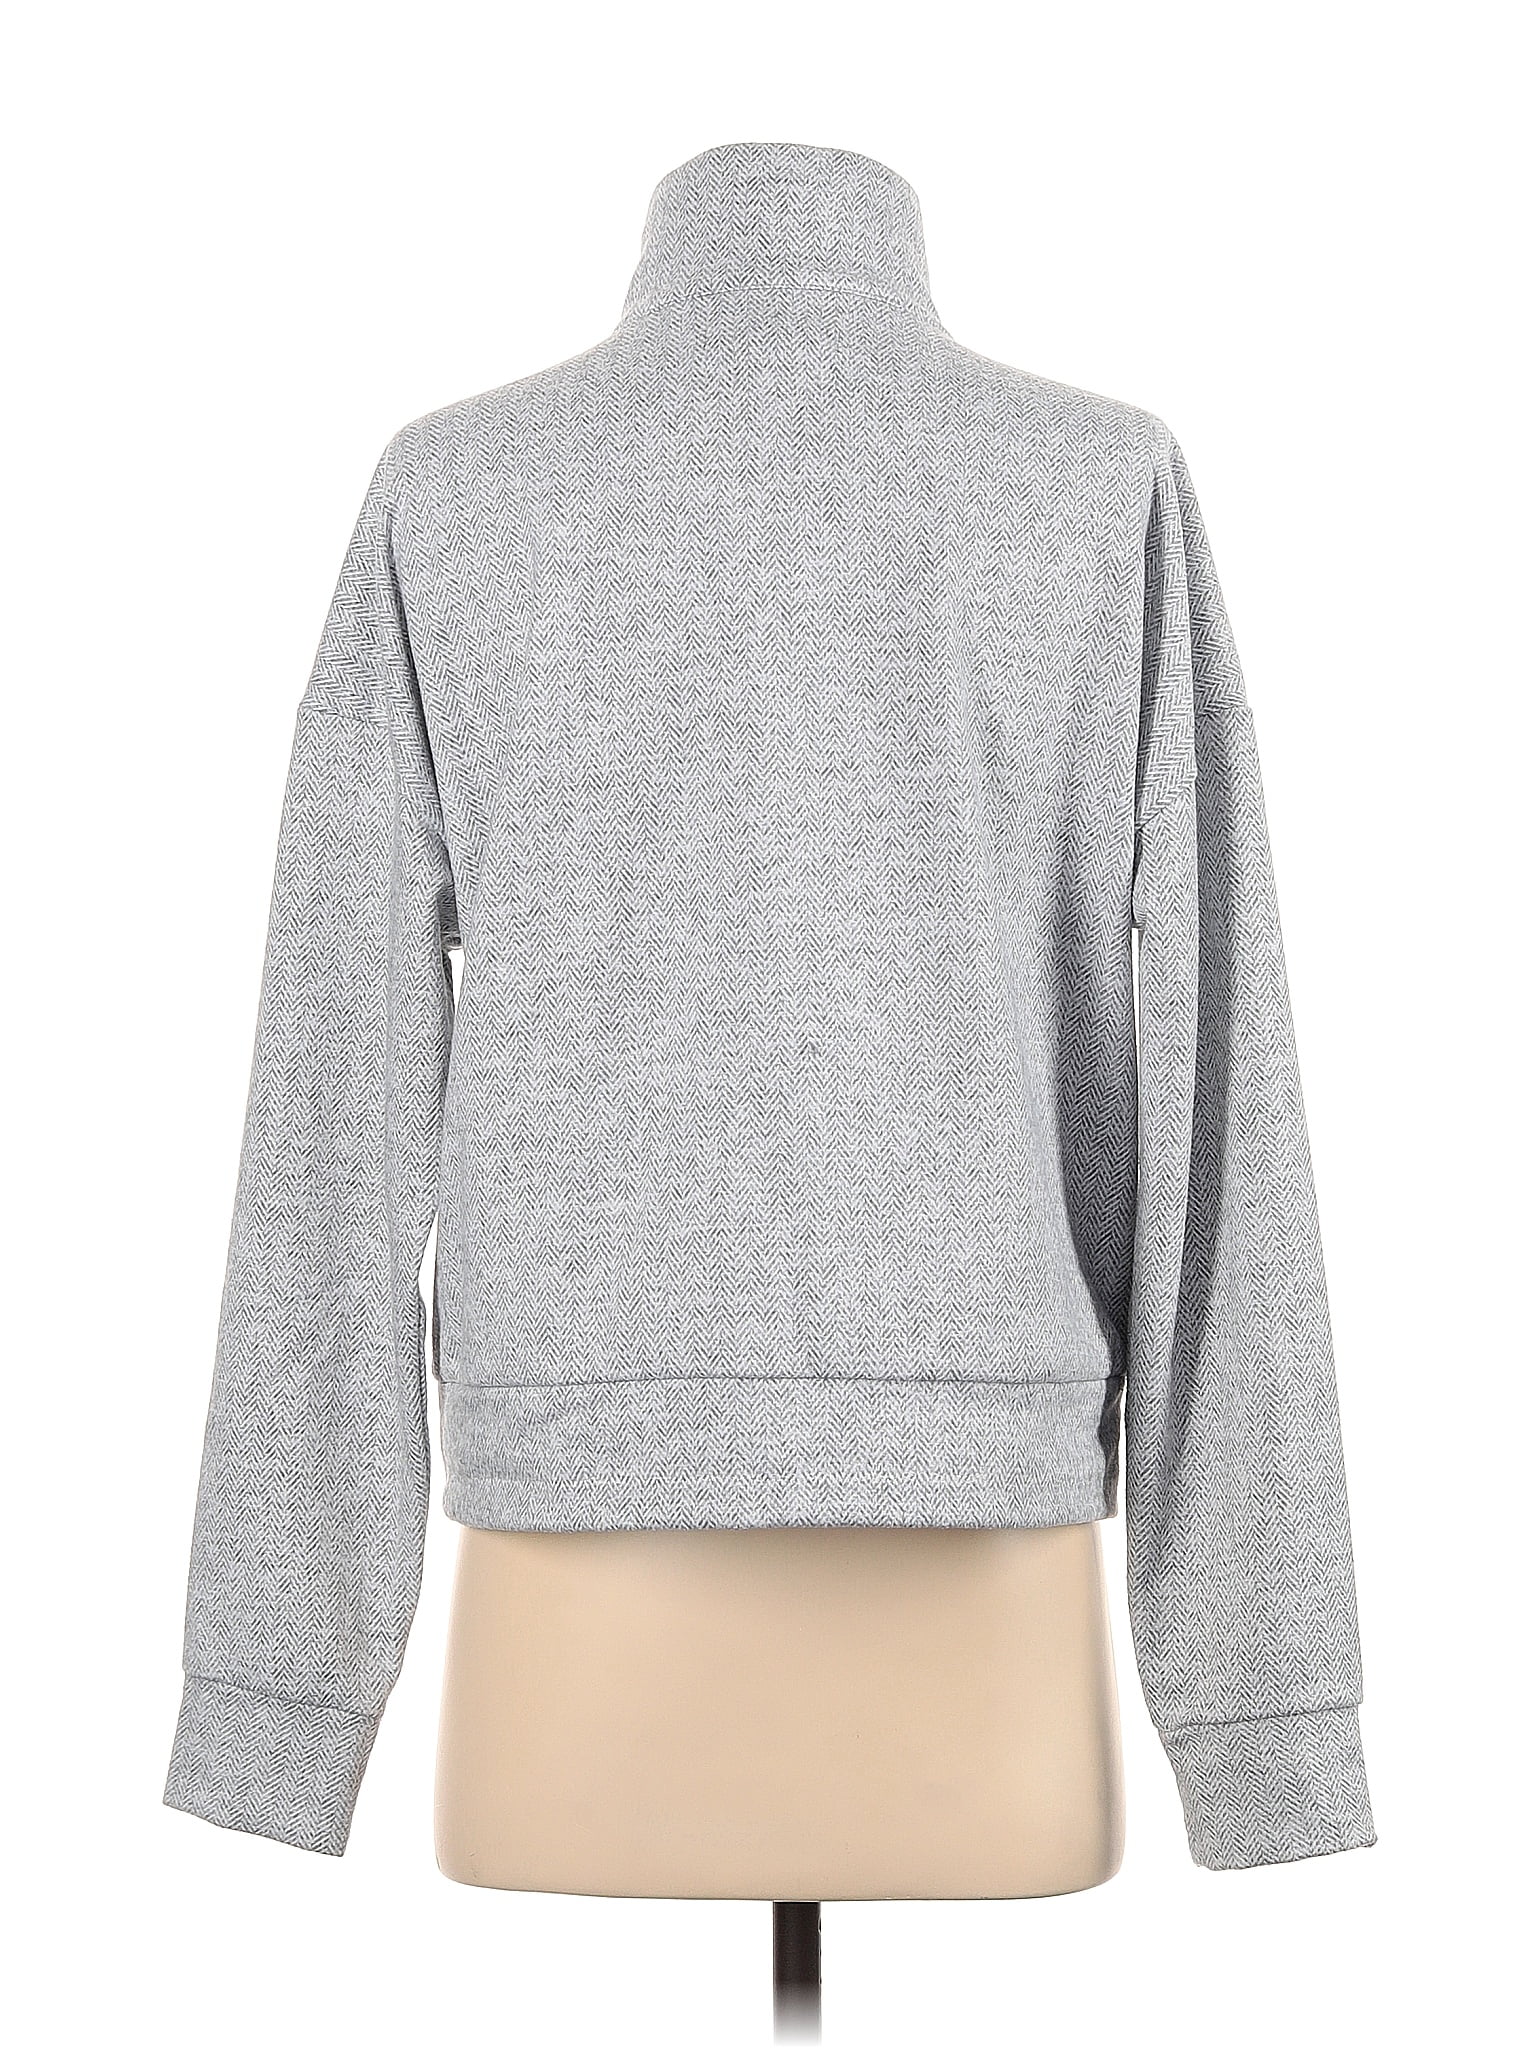 Kyodan Color Block Marled Gray Pullover Sweater Size P - Sm - 48% off